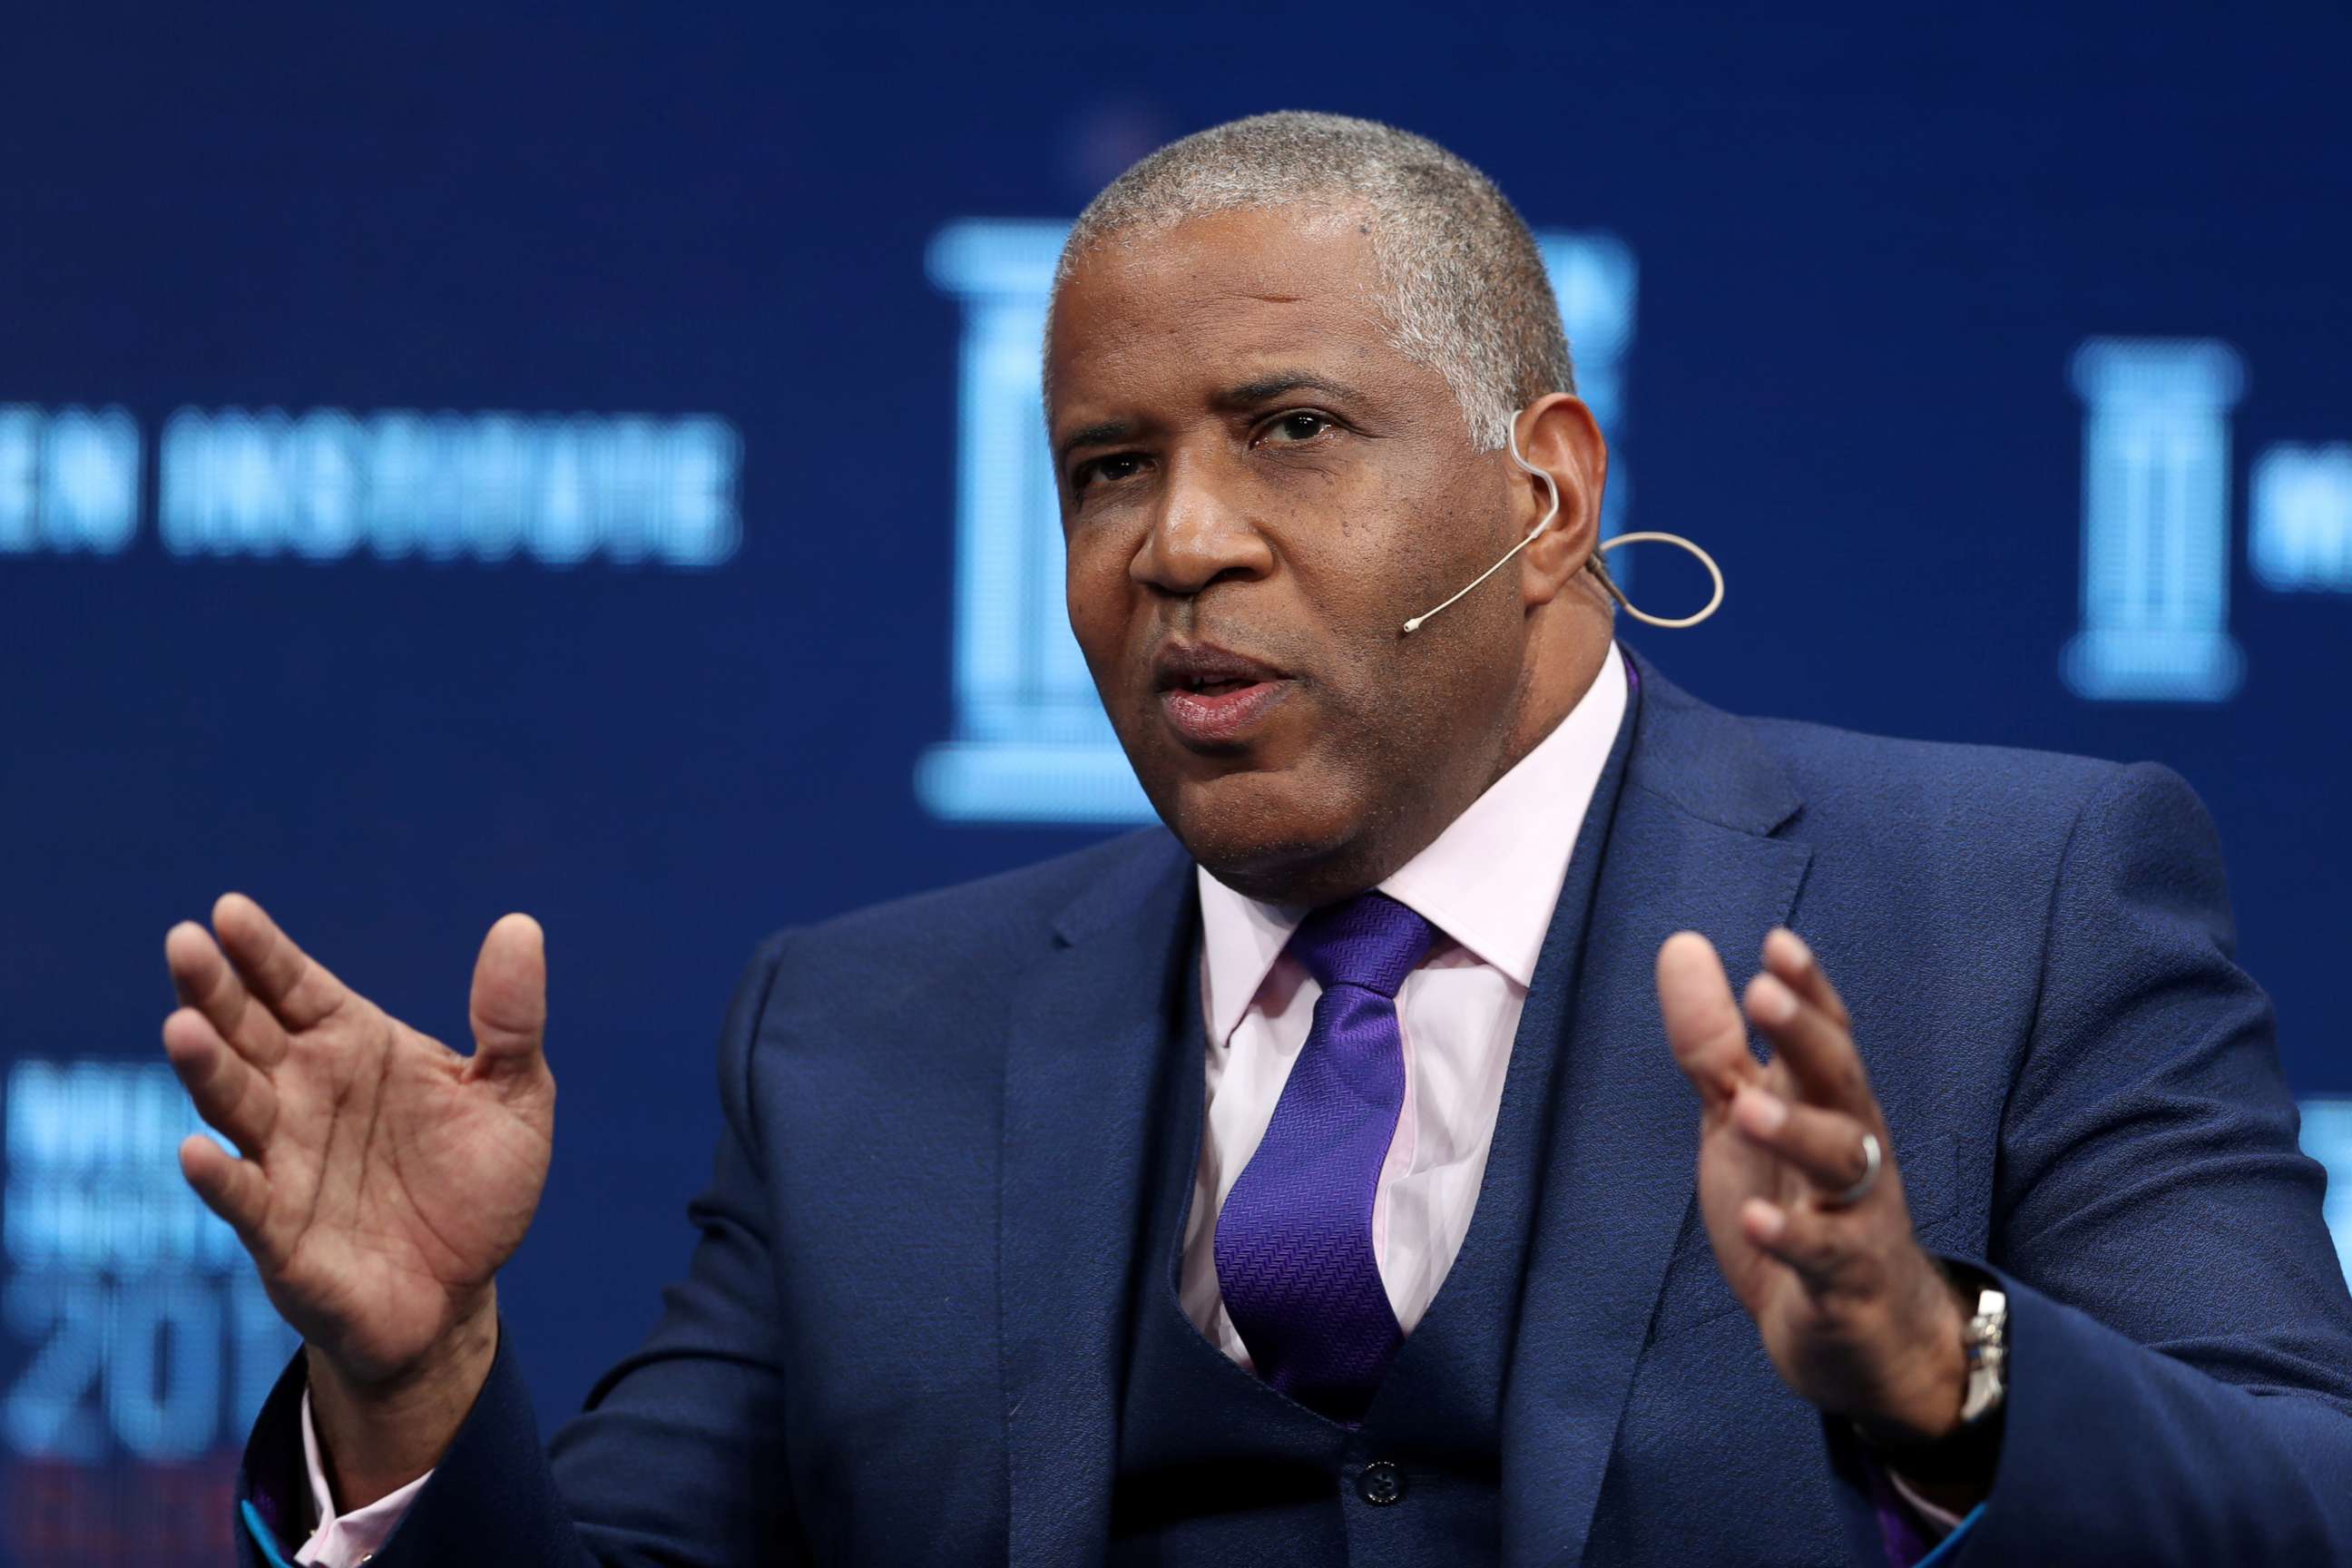 PHOTO: Robert Smith, Founder, Chairman and CEO, Vista Equity Partners, speaks at the Milken Institute's 21st Global Conference in Beverly Hills, Calif., May 1, 2018.